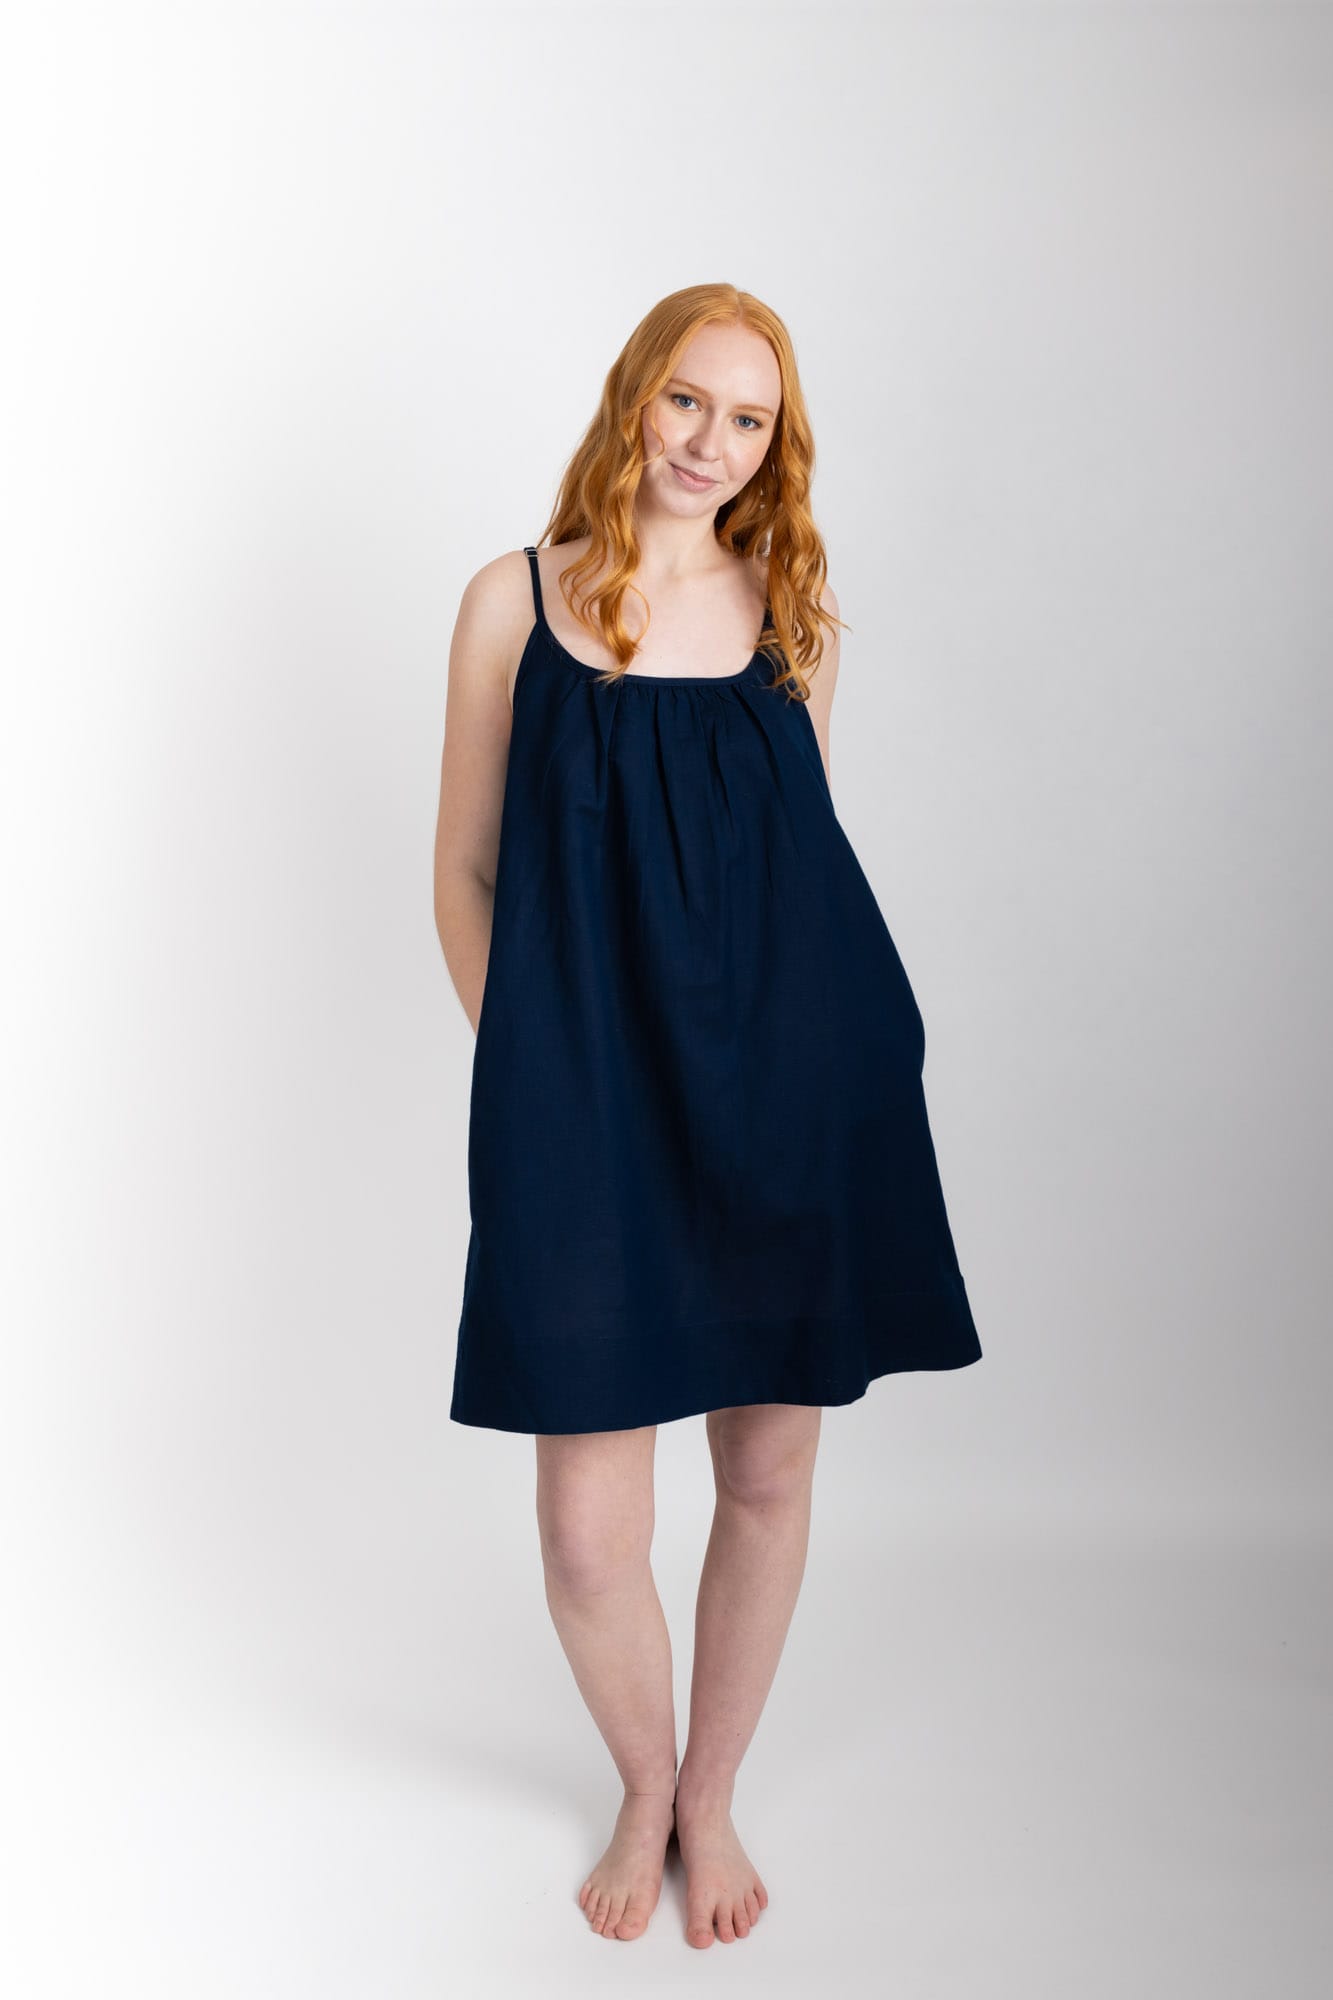 This knee length women’s nightdress dress features a scoop neck, adjustable spaghetti straps and side pockets. Finished with a wide hem, French seams, it is made from an organic cotton and linen blend, in Navy